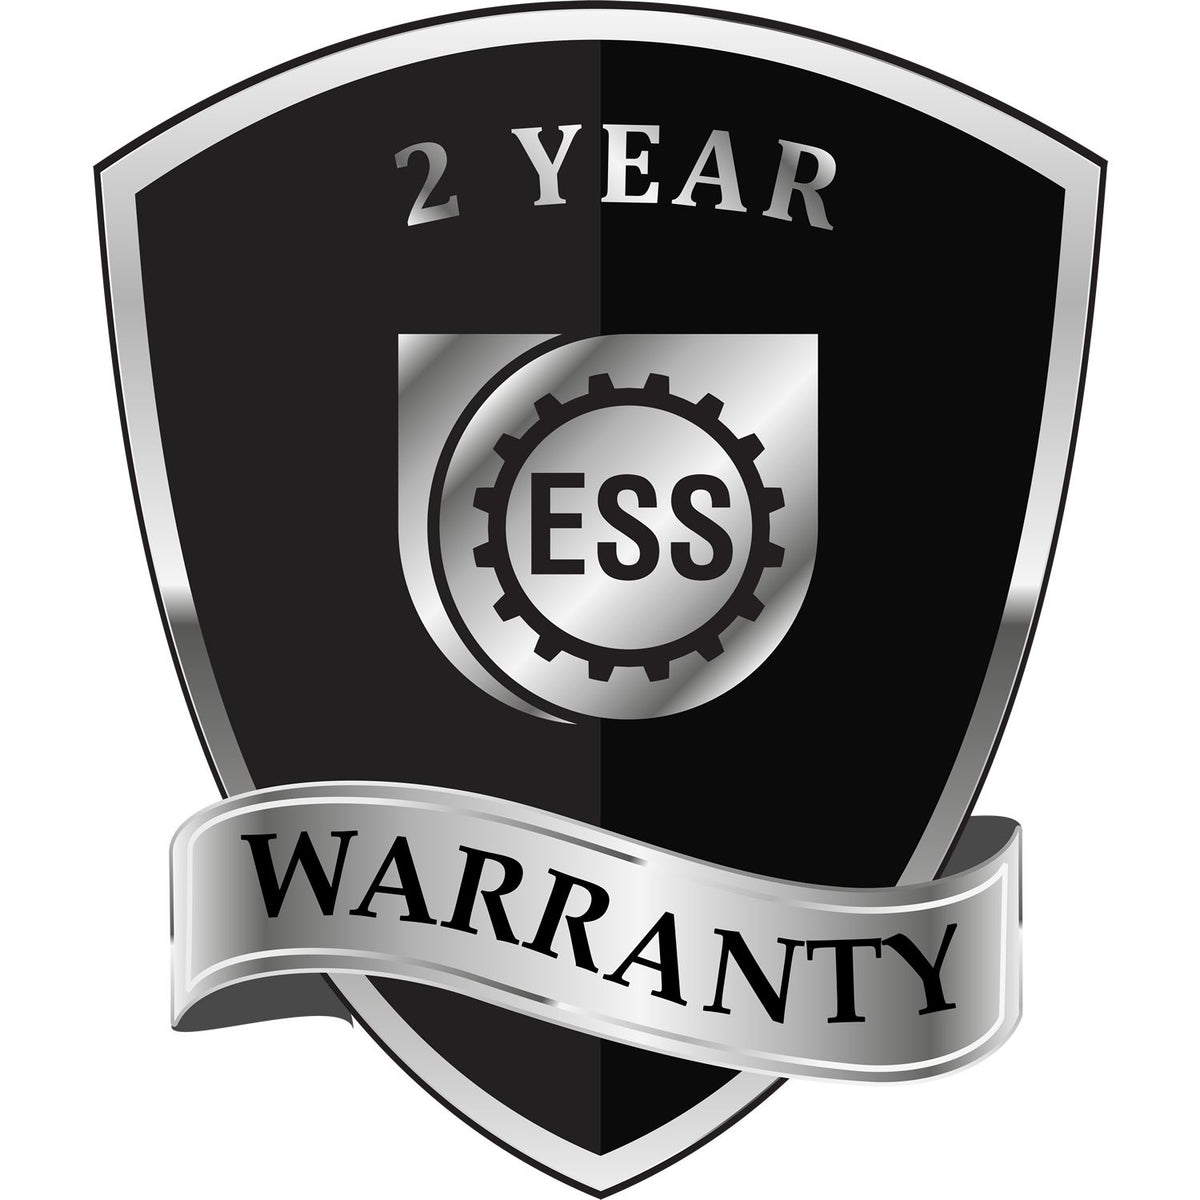 A badge or emblem showing a warranty icon for the Long Reach Hawaii PE Seal